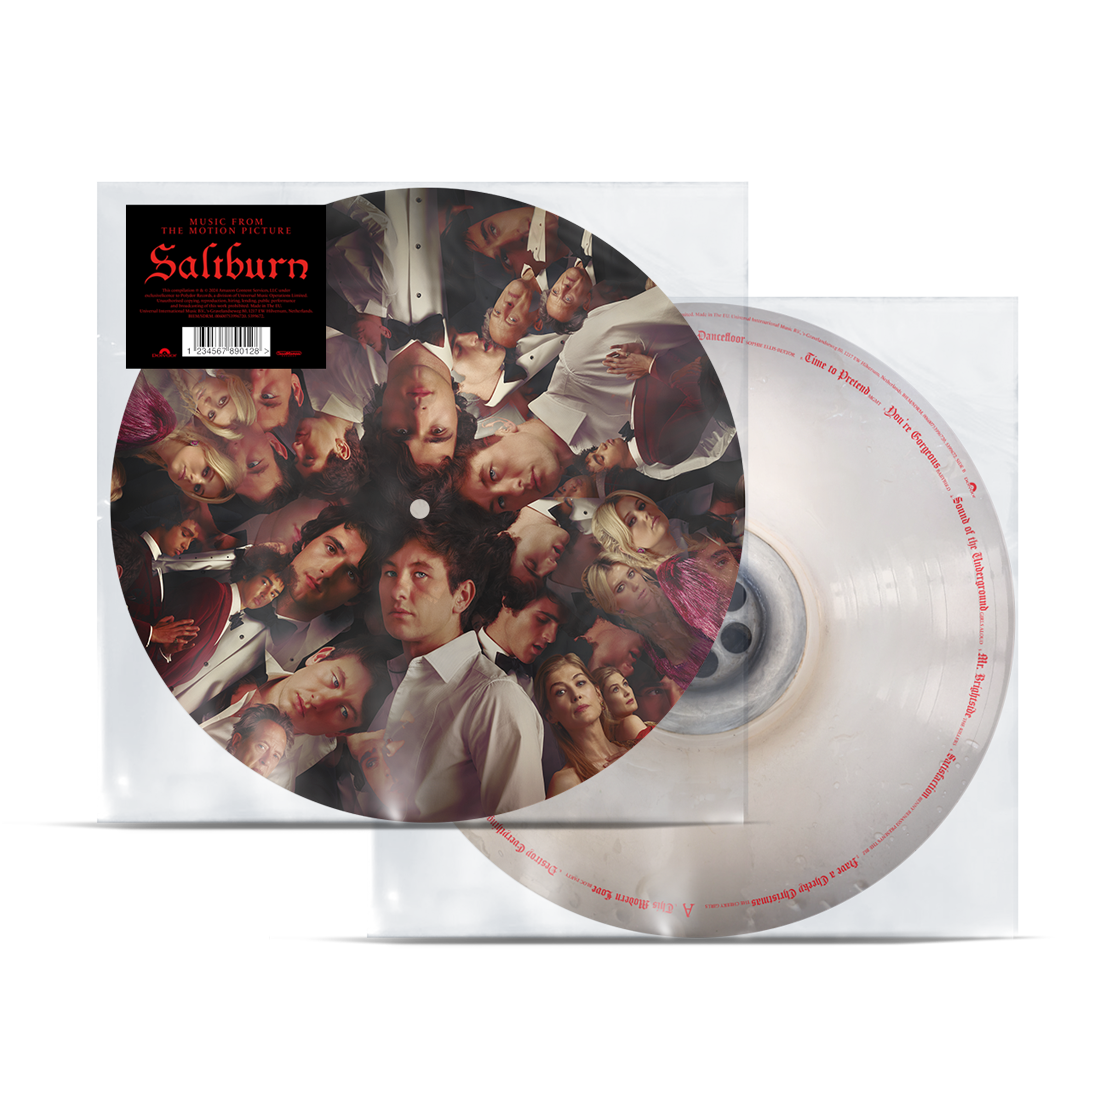 Saltburn (Music From The Motion Picture): Limited Picture Disc Vinyl LP